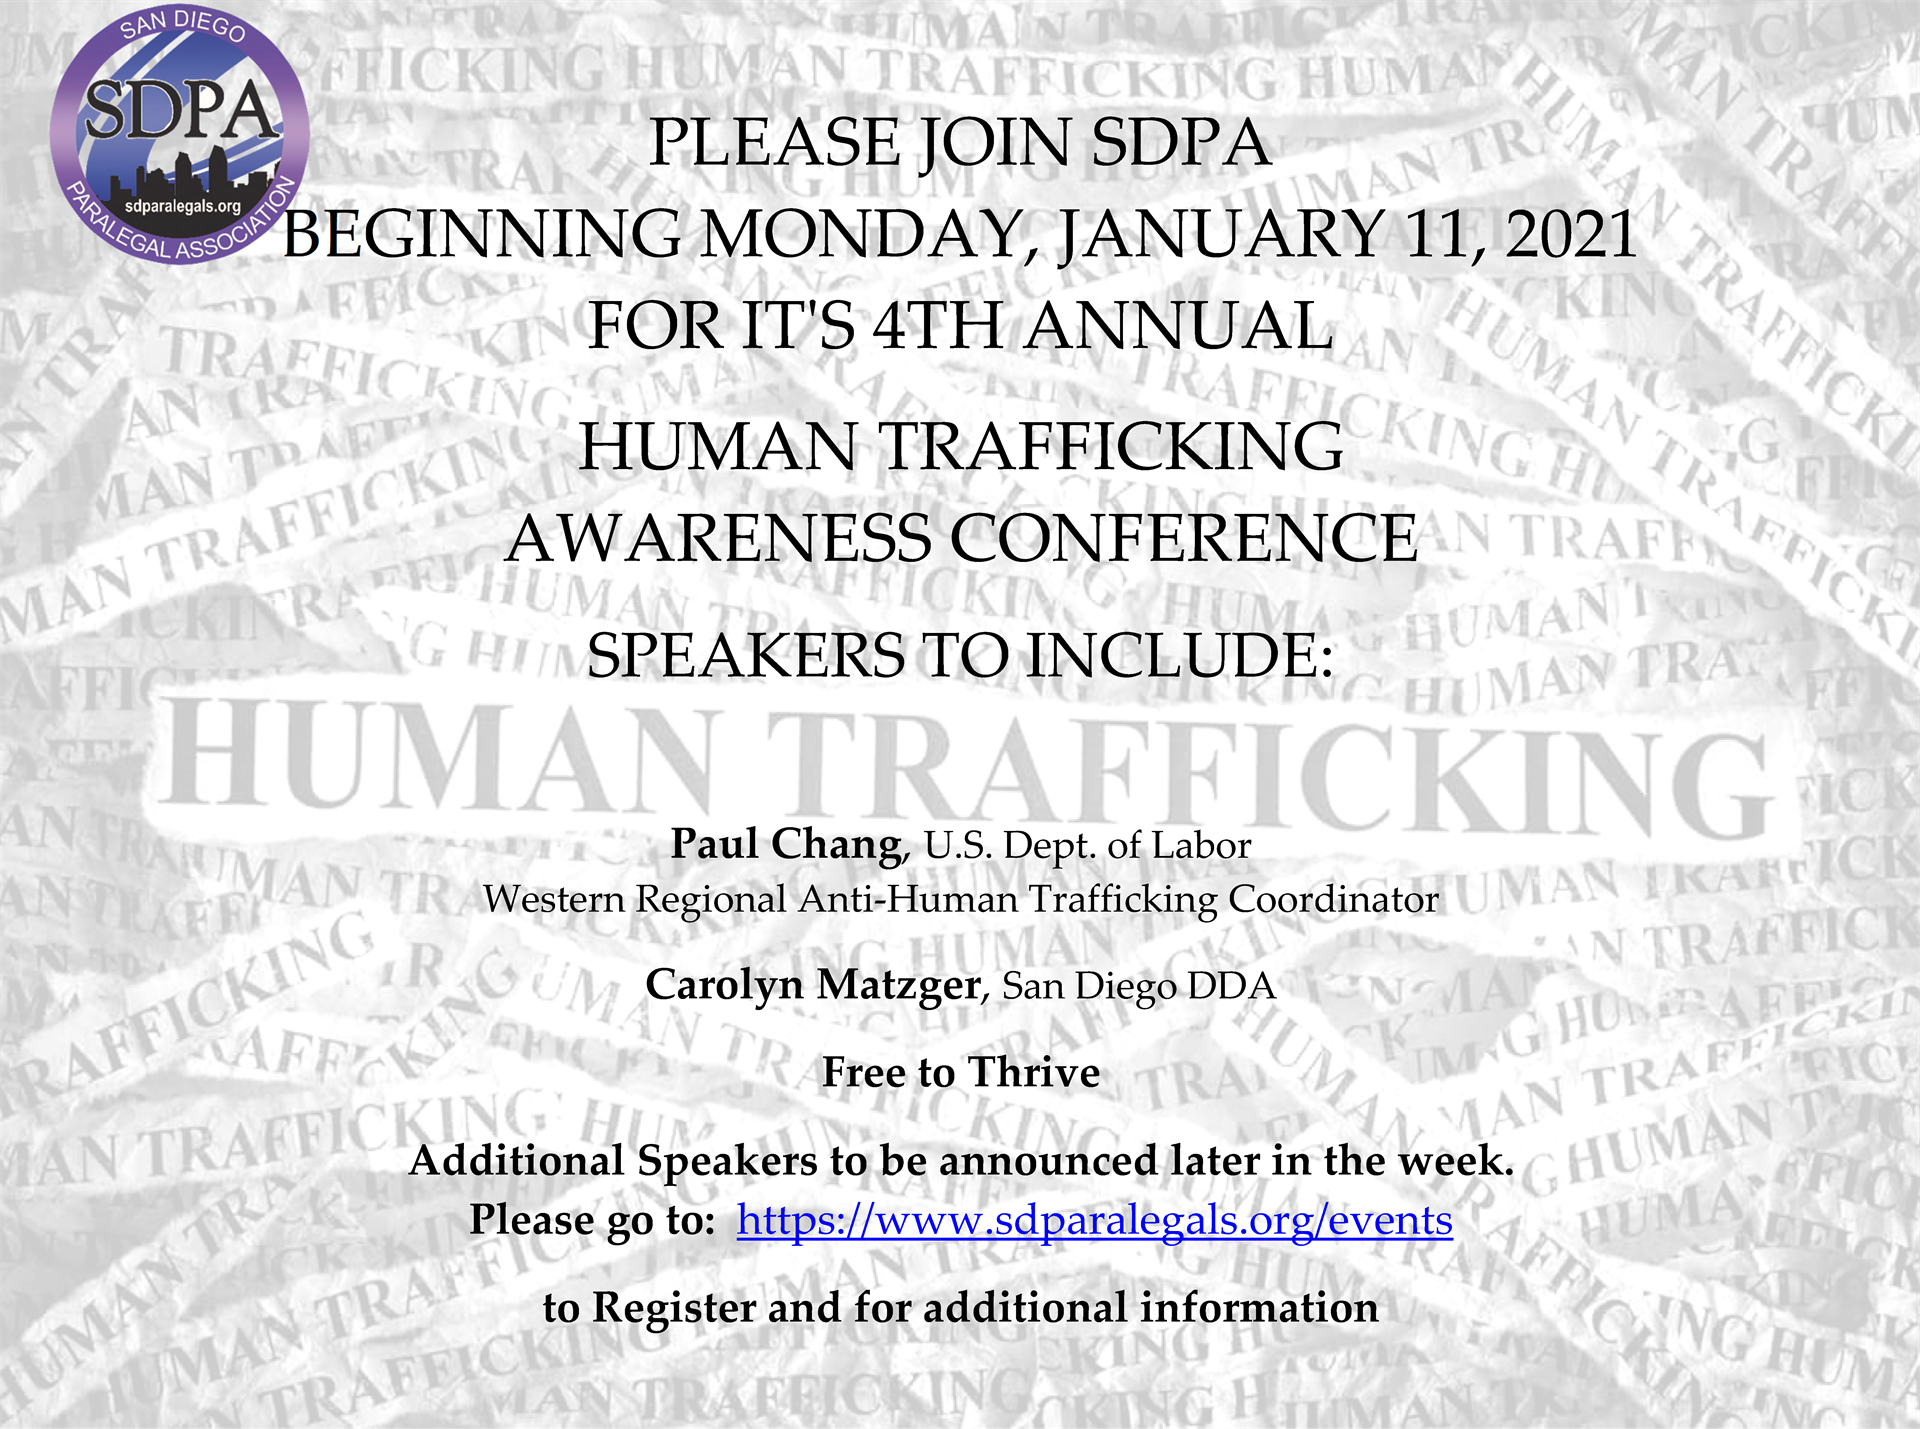 Please join SDPA beginning Monday, January 11, 2021 for its 4th Annual Human Trafficking Awareness Conference. www.sdparalegals.org